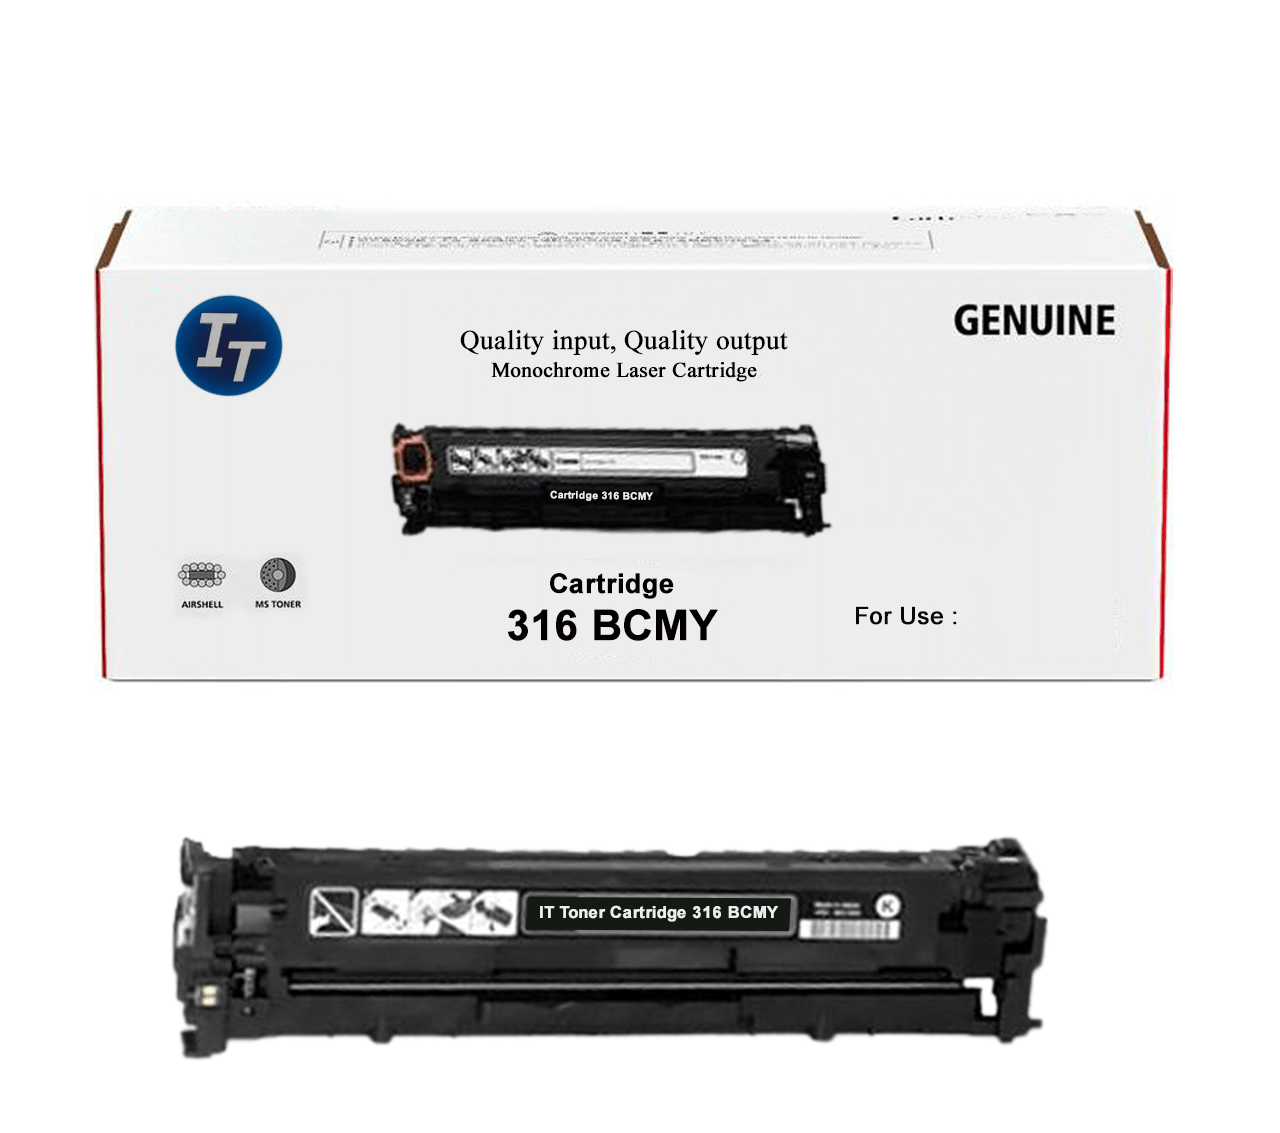 IT Toner Cartridge Canon 316 BCMY (7).png